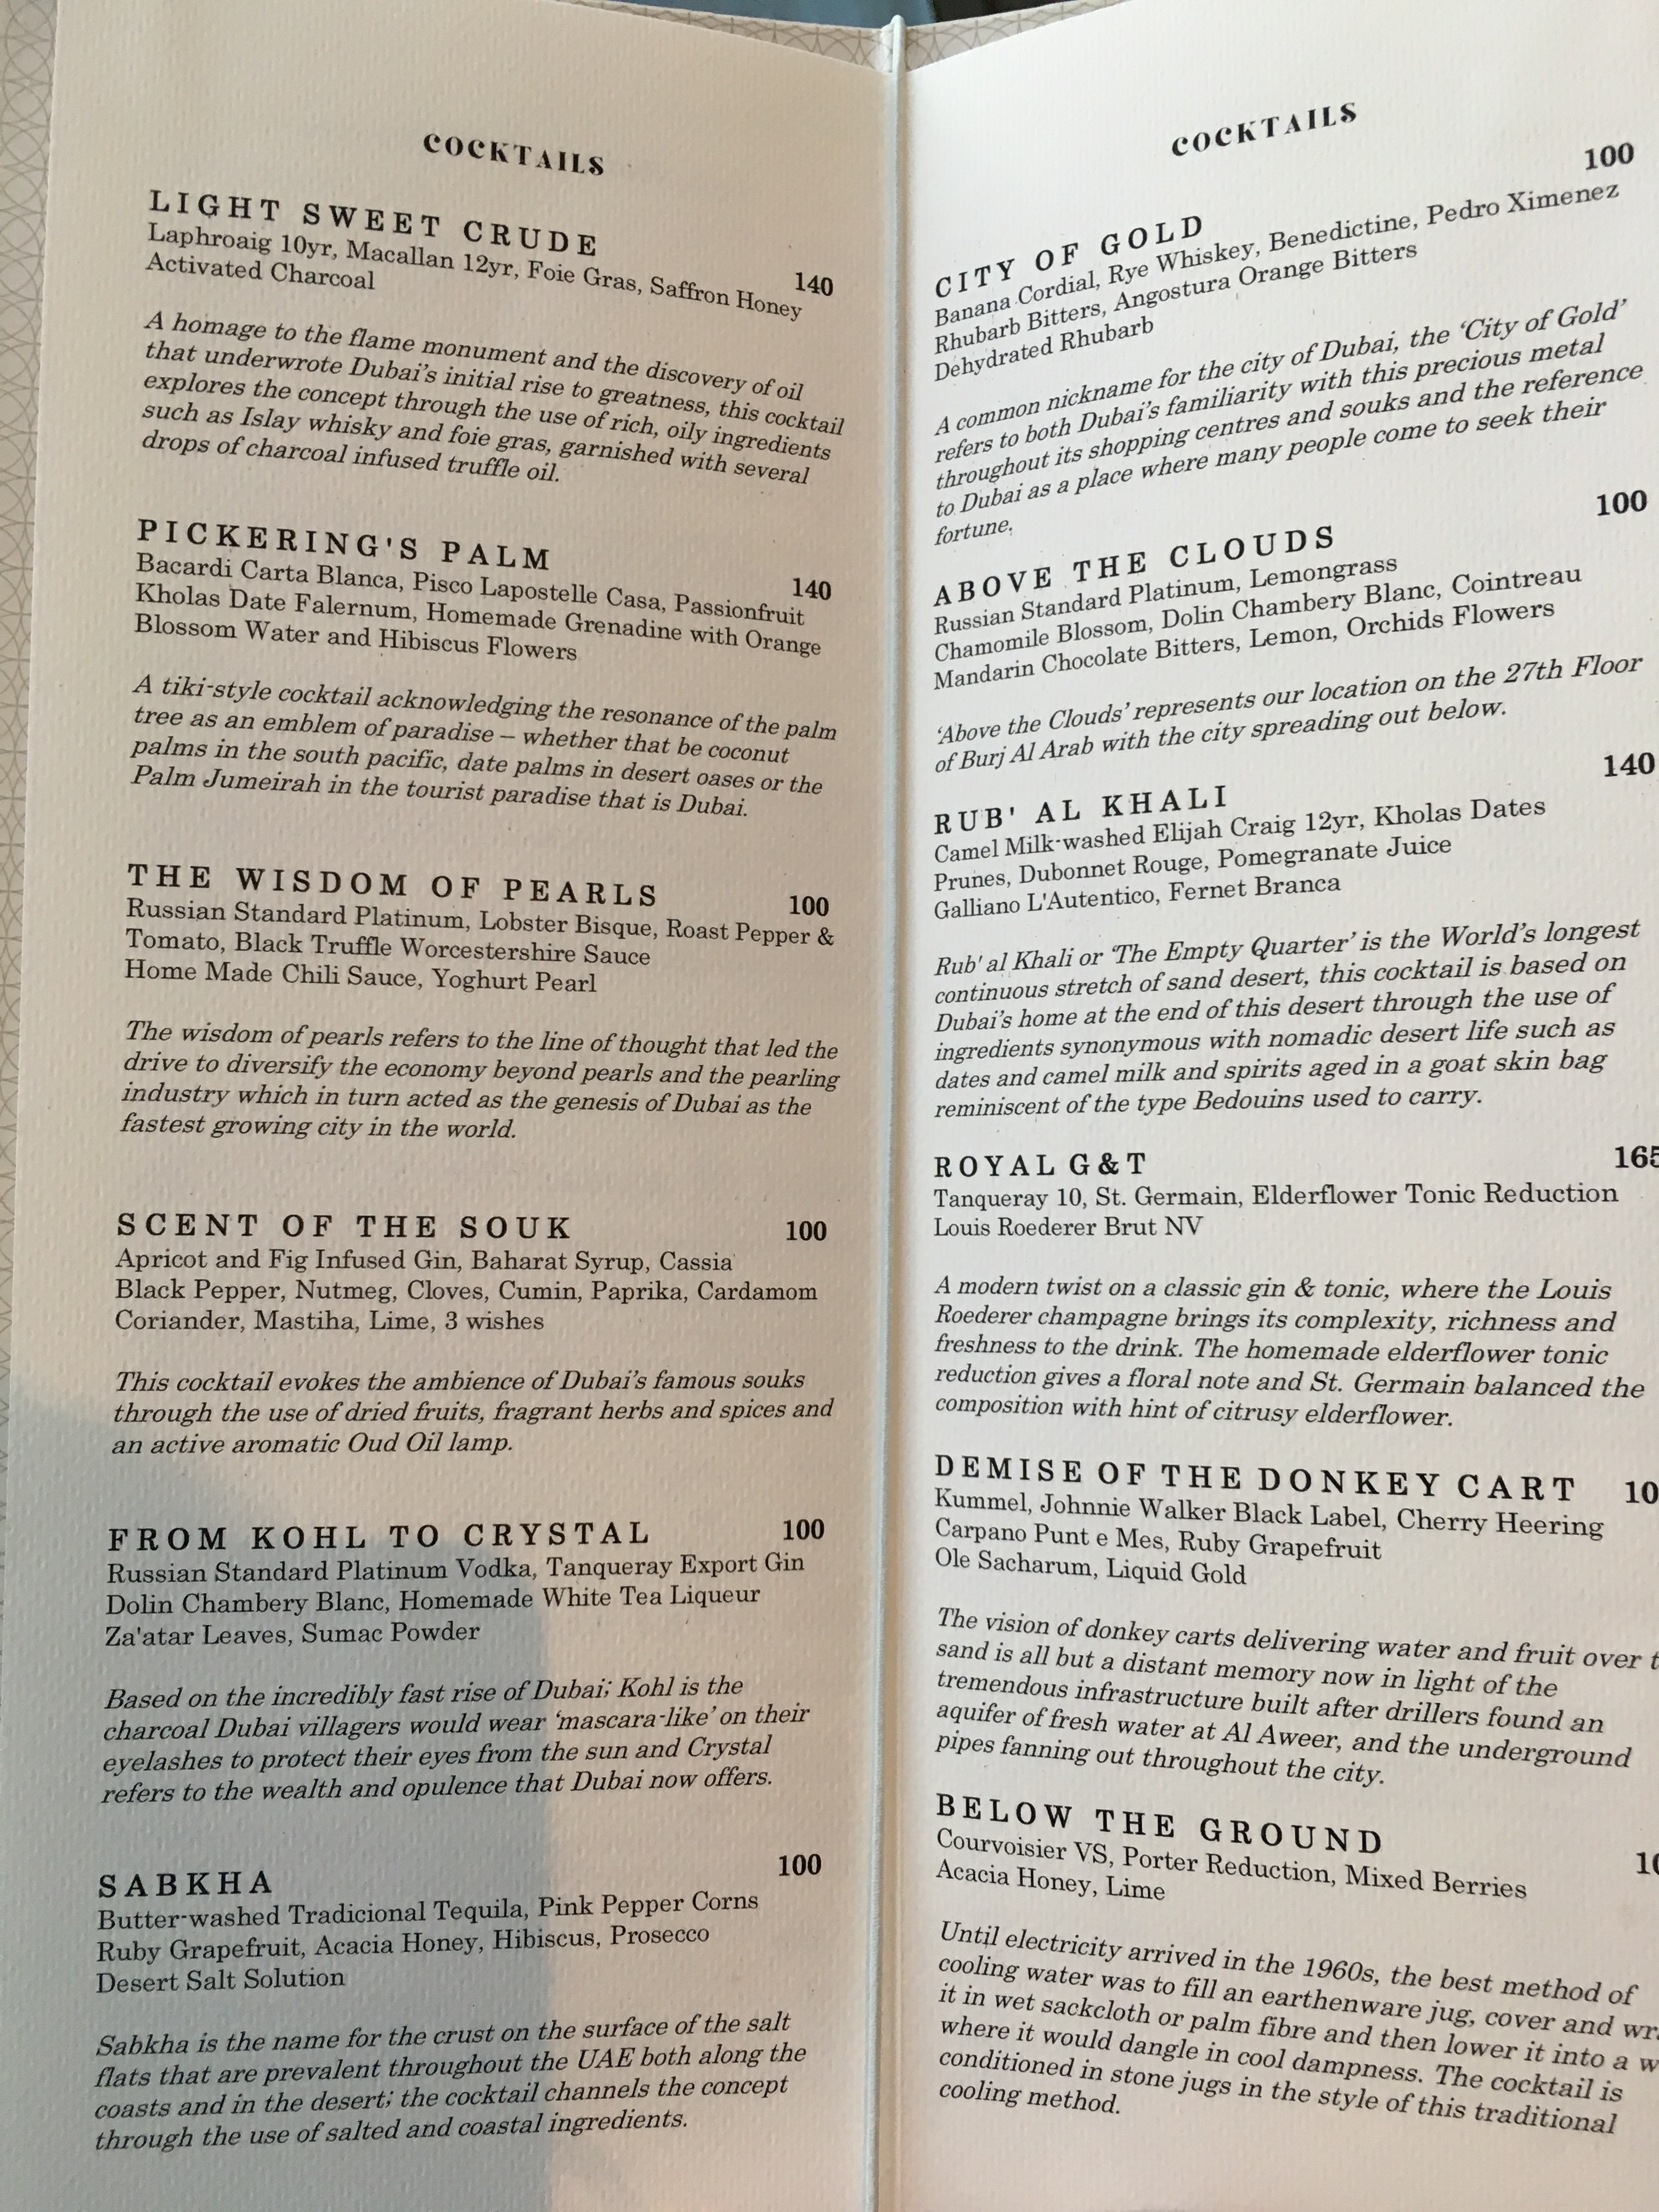 Cocktail menu for Gold on 27